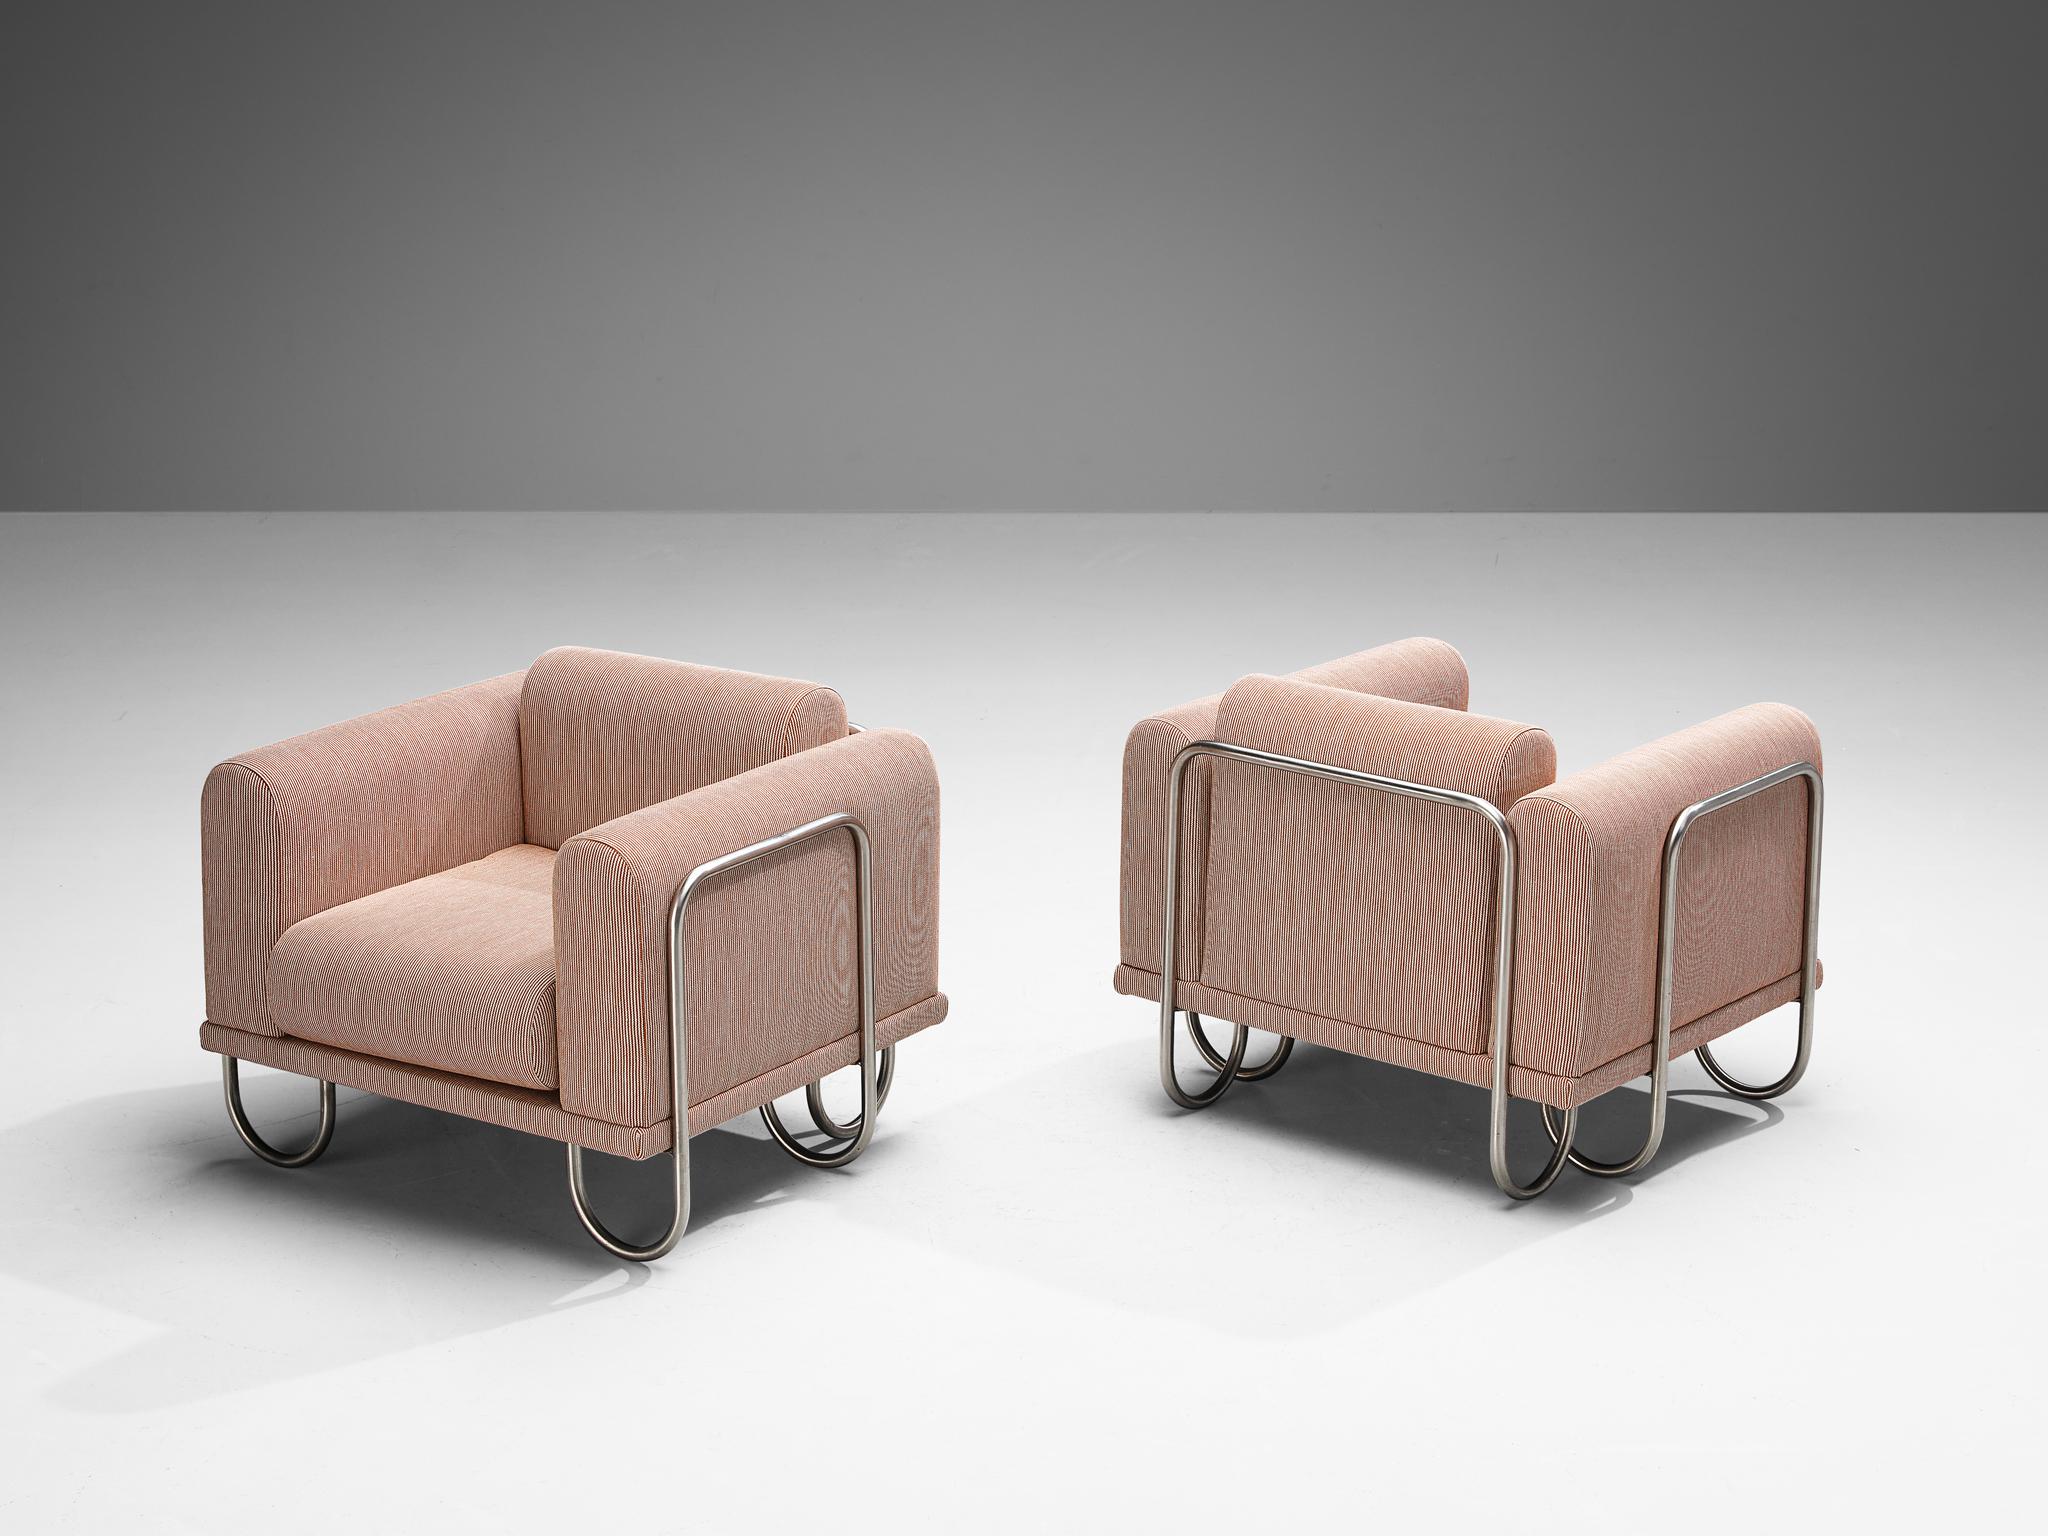 Byron Botker for Landes, lounge chairs, pink fabric, chrome-plated steel, United States, 1970s

A comfortable easy chair that features a curved, chromed tubular frame. The frame appears to be an ongoing curved line, moving upwards to support the